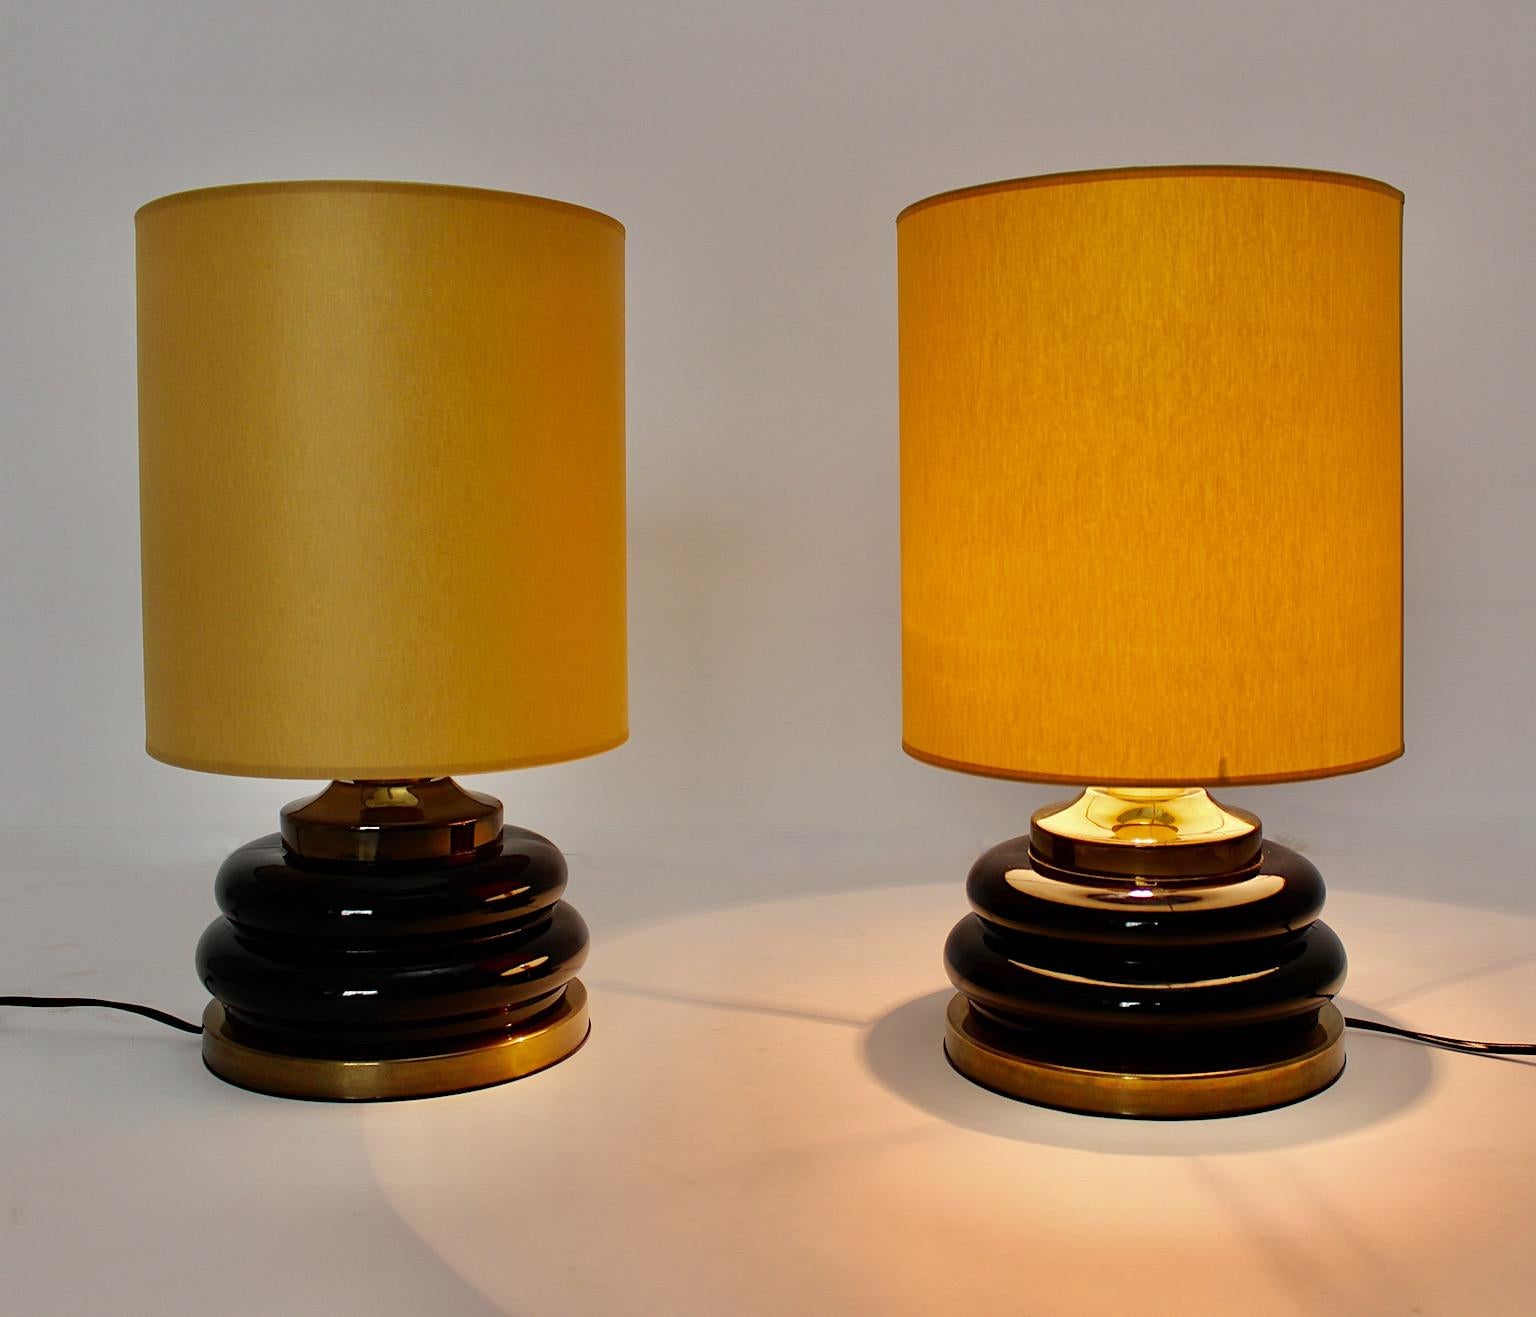 Brass Modernist Brown Gold Glass Vintage Table Lamps Pair Duo, 1970s, Italy For Sale